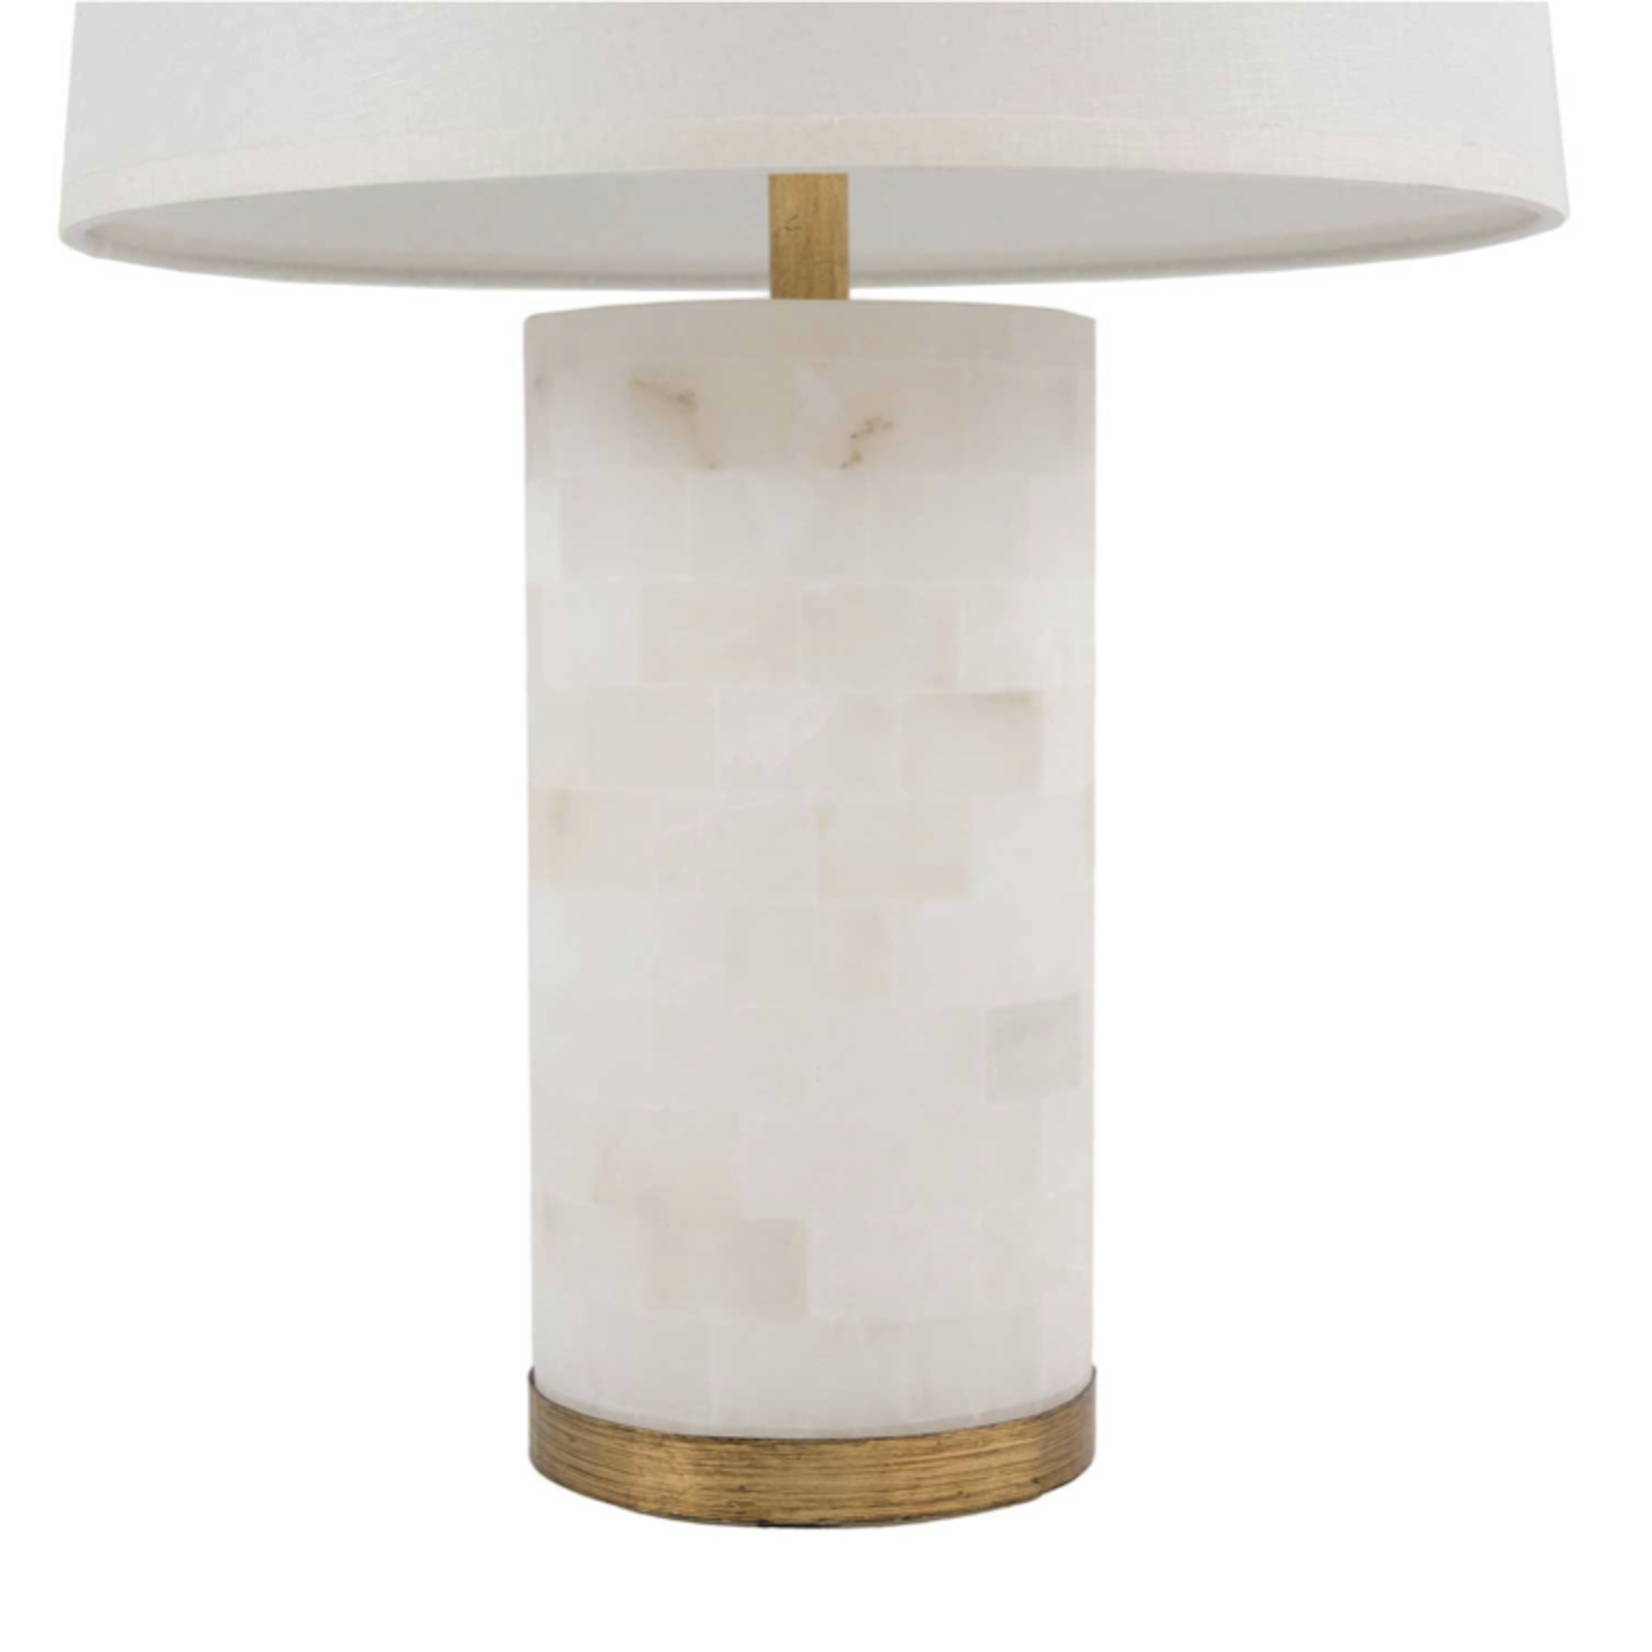 Outside The Box 27" Maple Alabaster & Iron Table Lamp